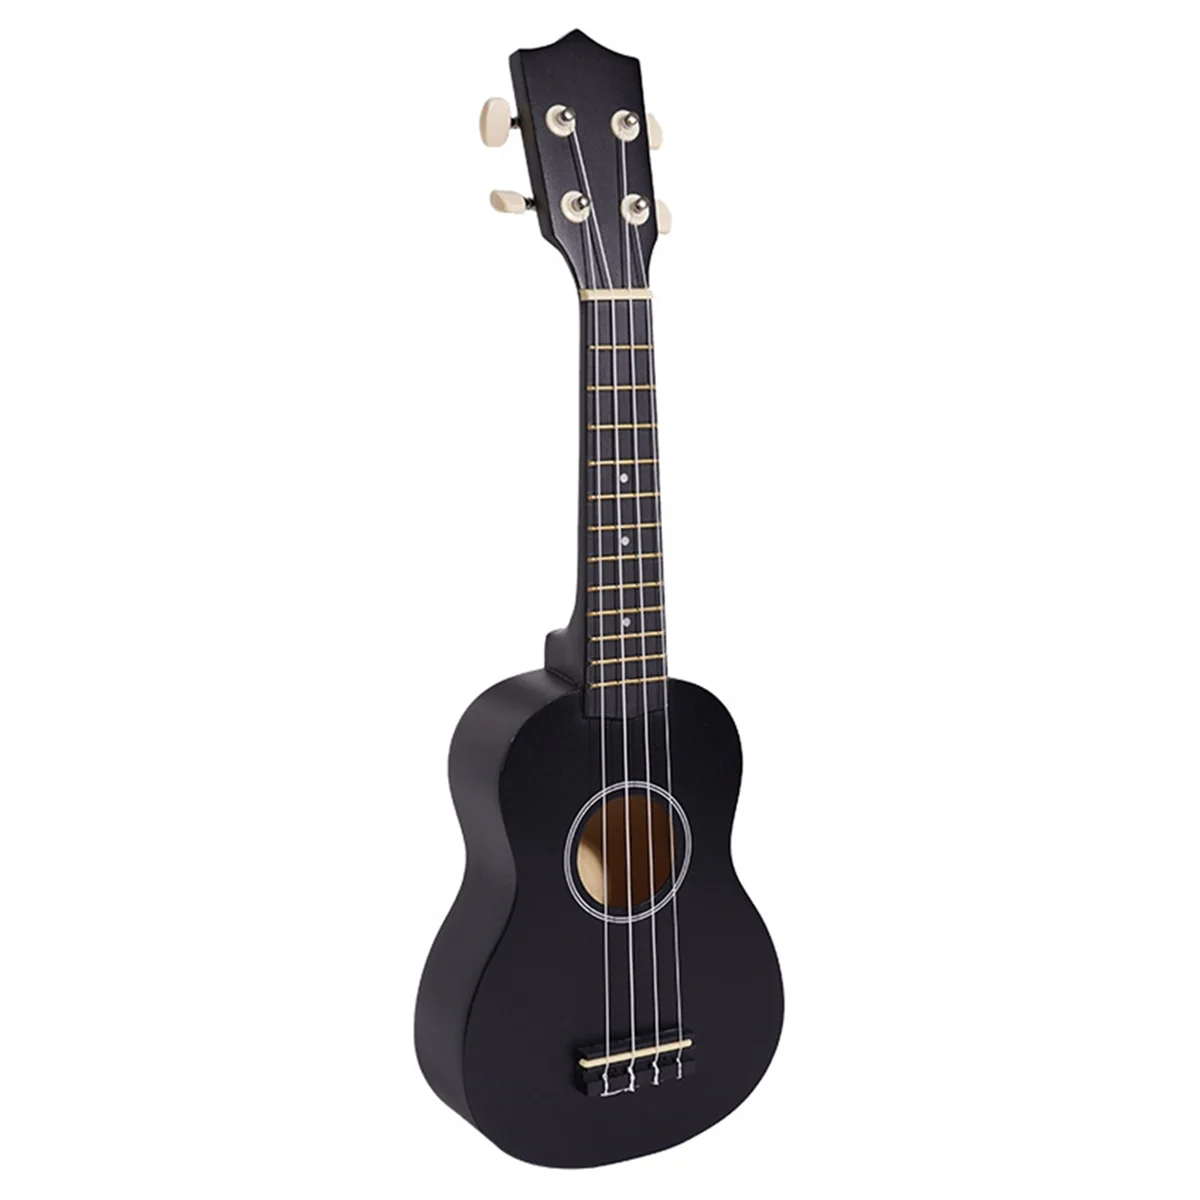 

C Musical Ukulele for Adults, Children and Beginners Entry-Level Four-String Small Guitar Children'S Instrument